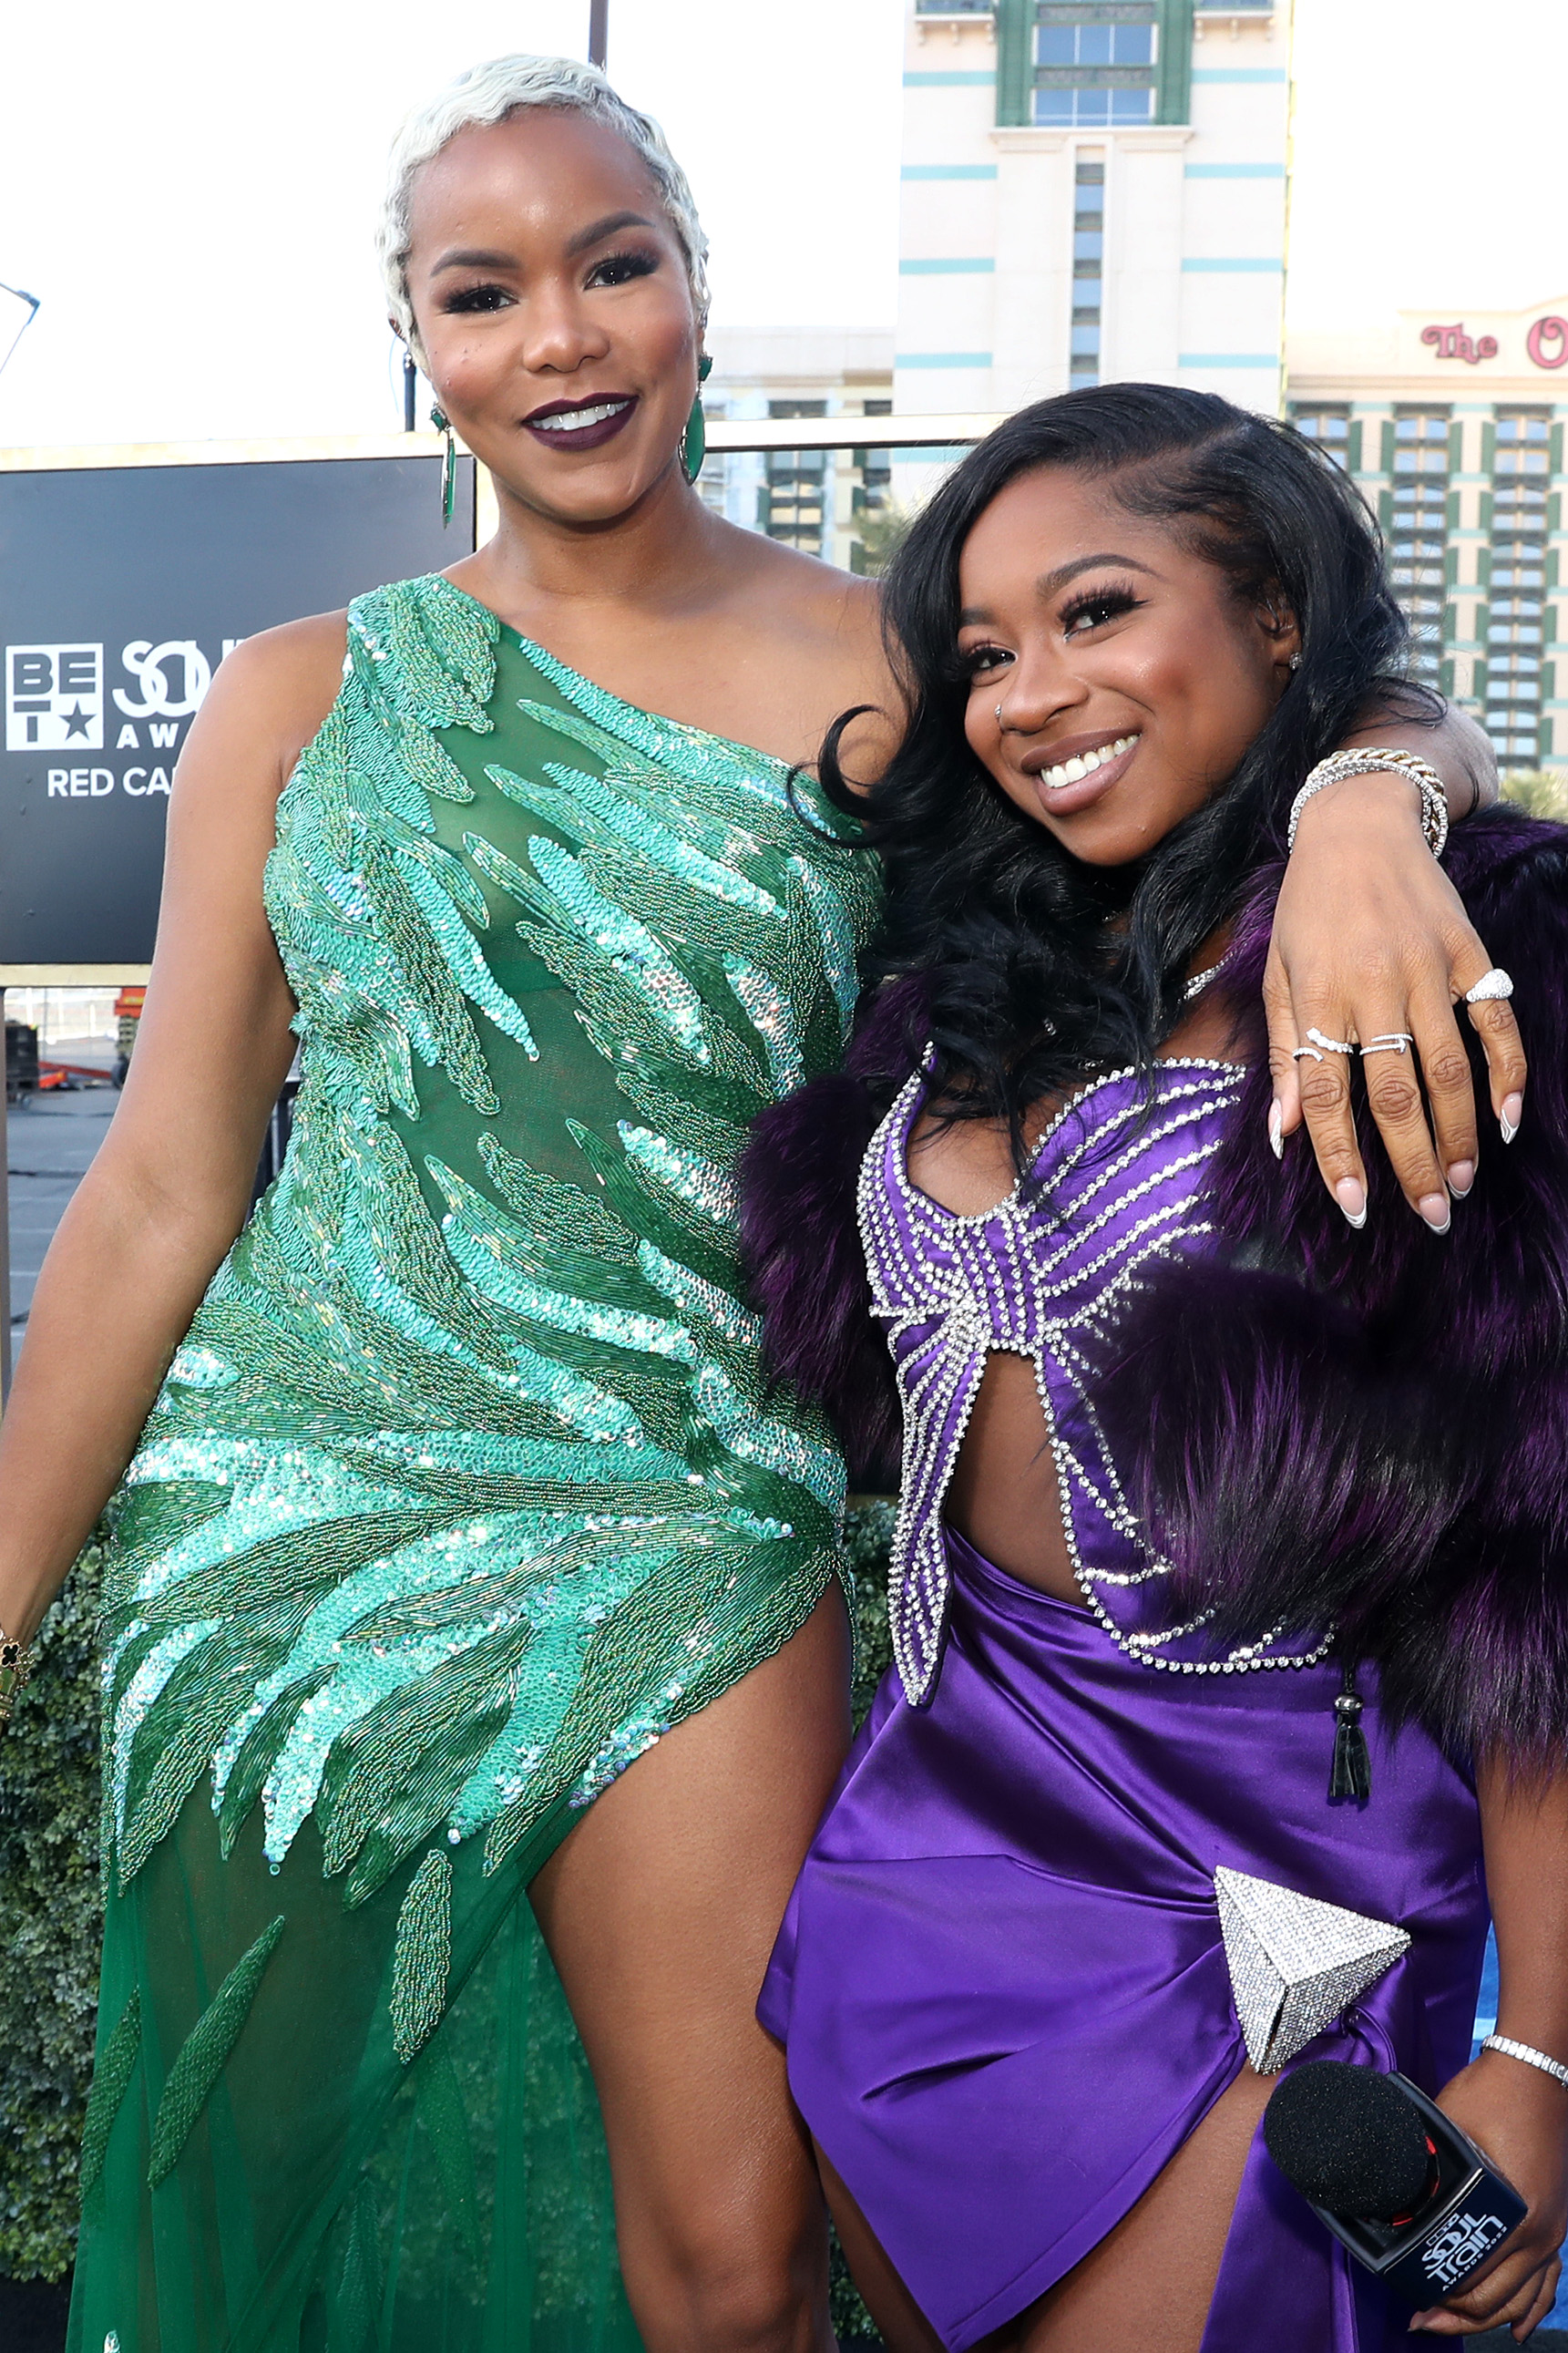 The "2022 Soul Train Awards" Presented By BET - Arrivals